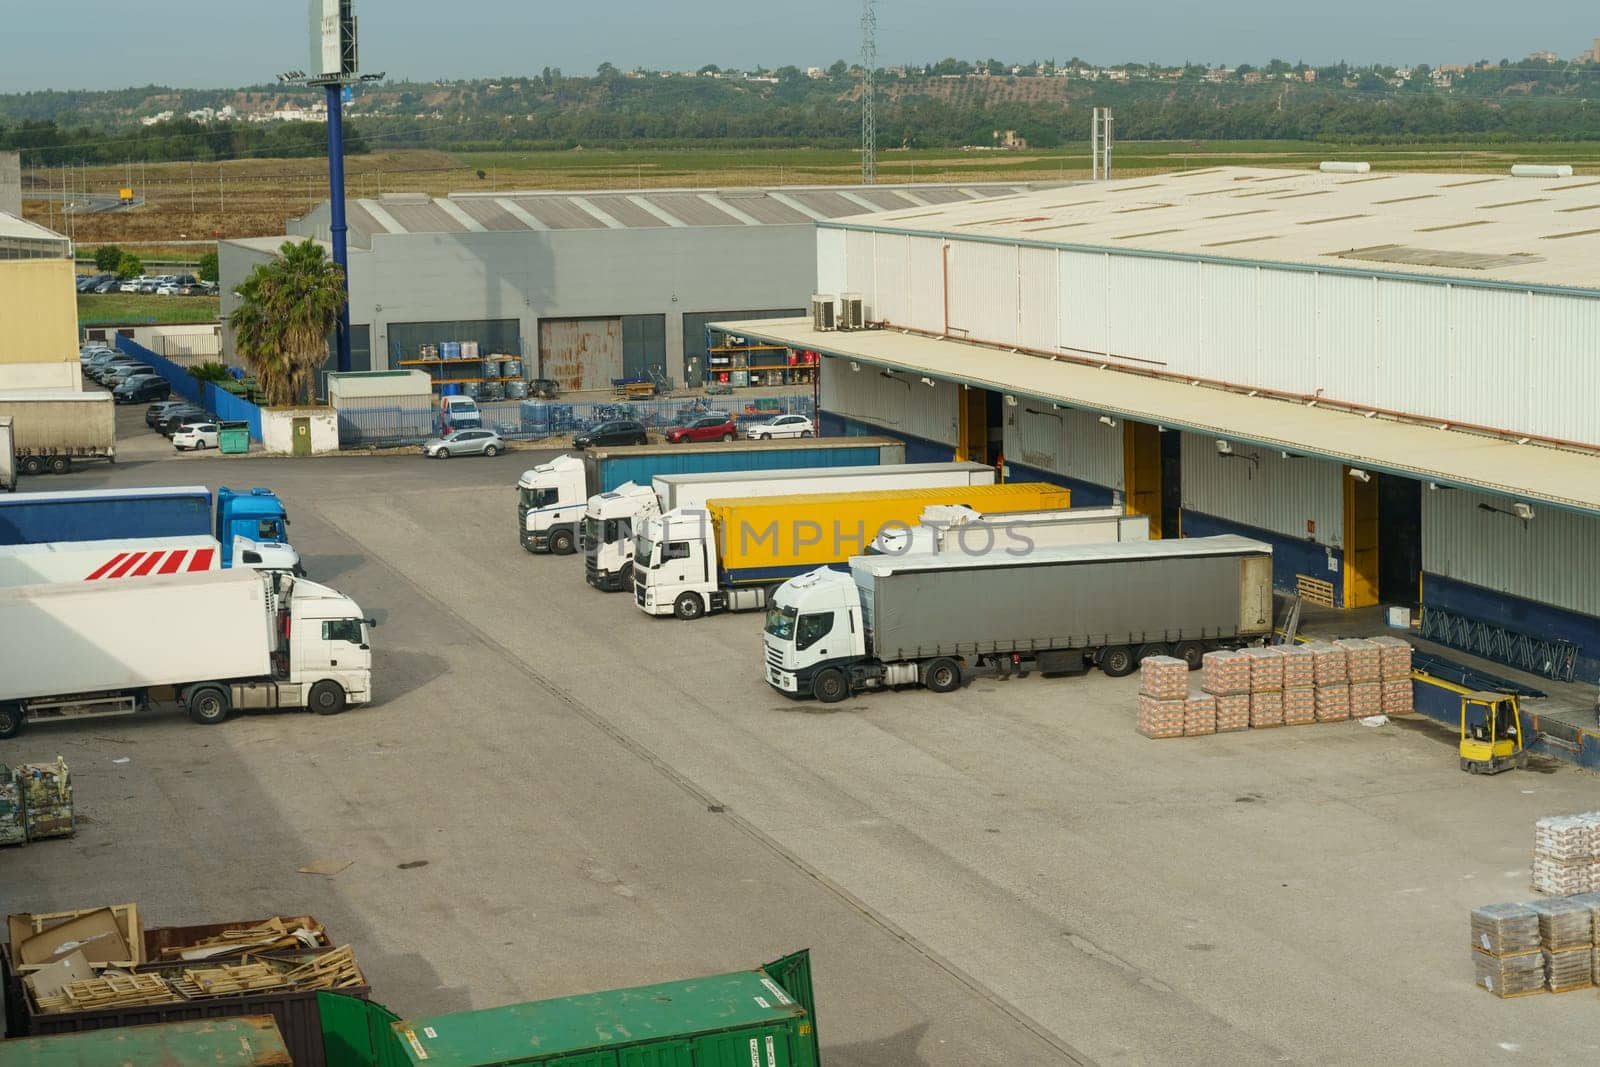 Multiple trucks of varying sizes and colors are parked neatly in rows in a large parking lot dedicated to transport and logistics operations.